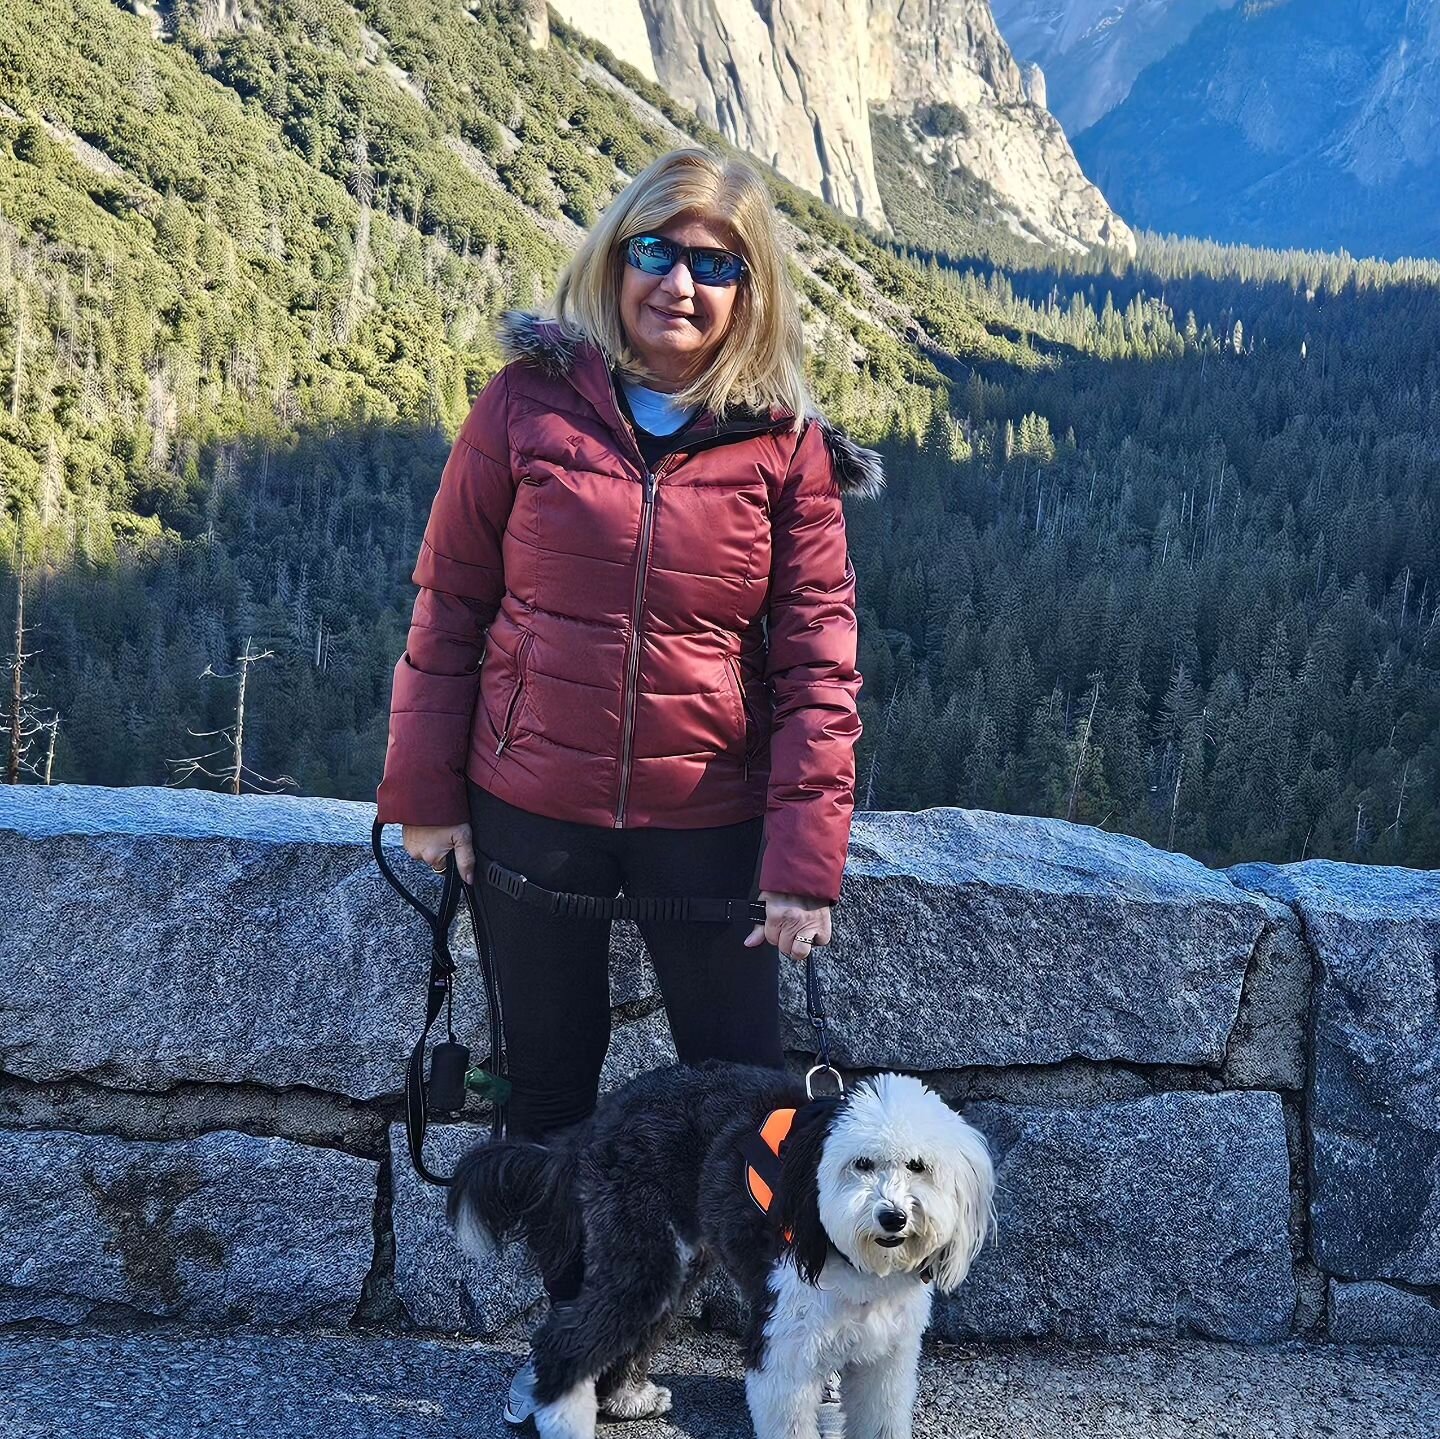 Stunning Yosemite! Natural beauty that is breathtaking! Alfie had a great time taking it all in with us 🐕